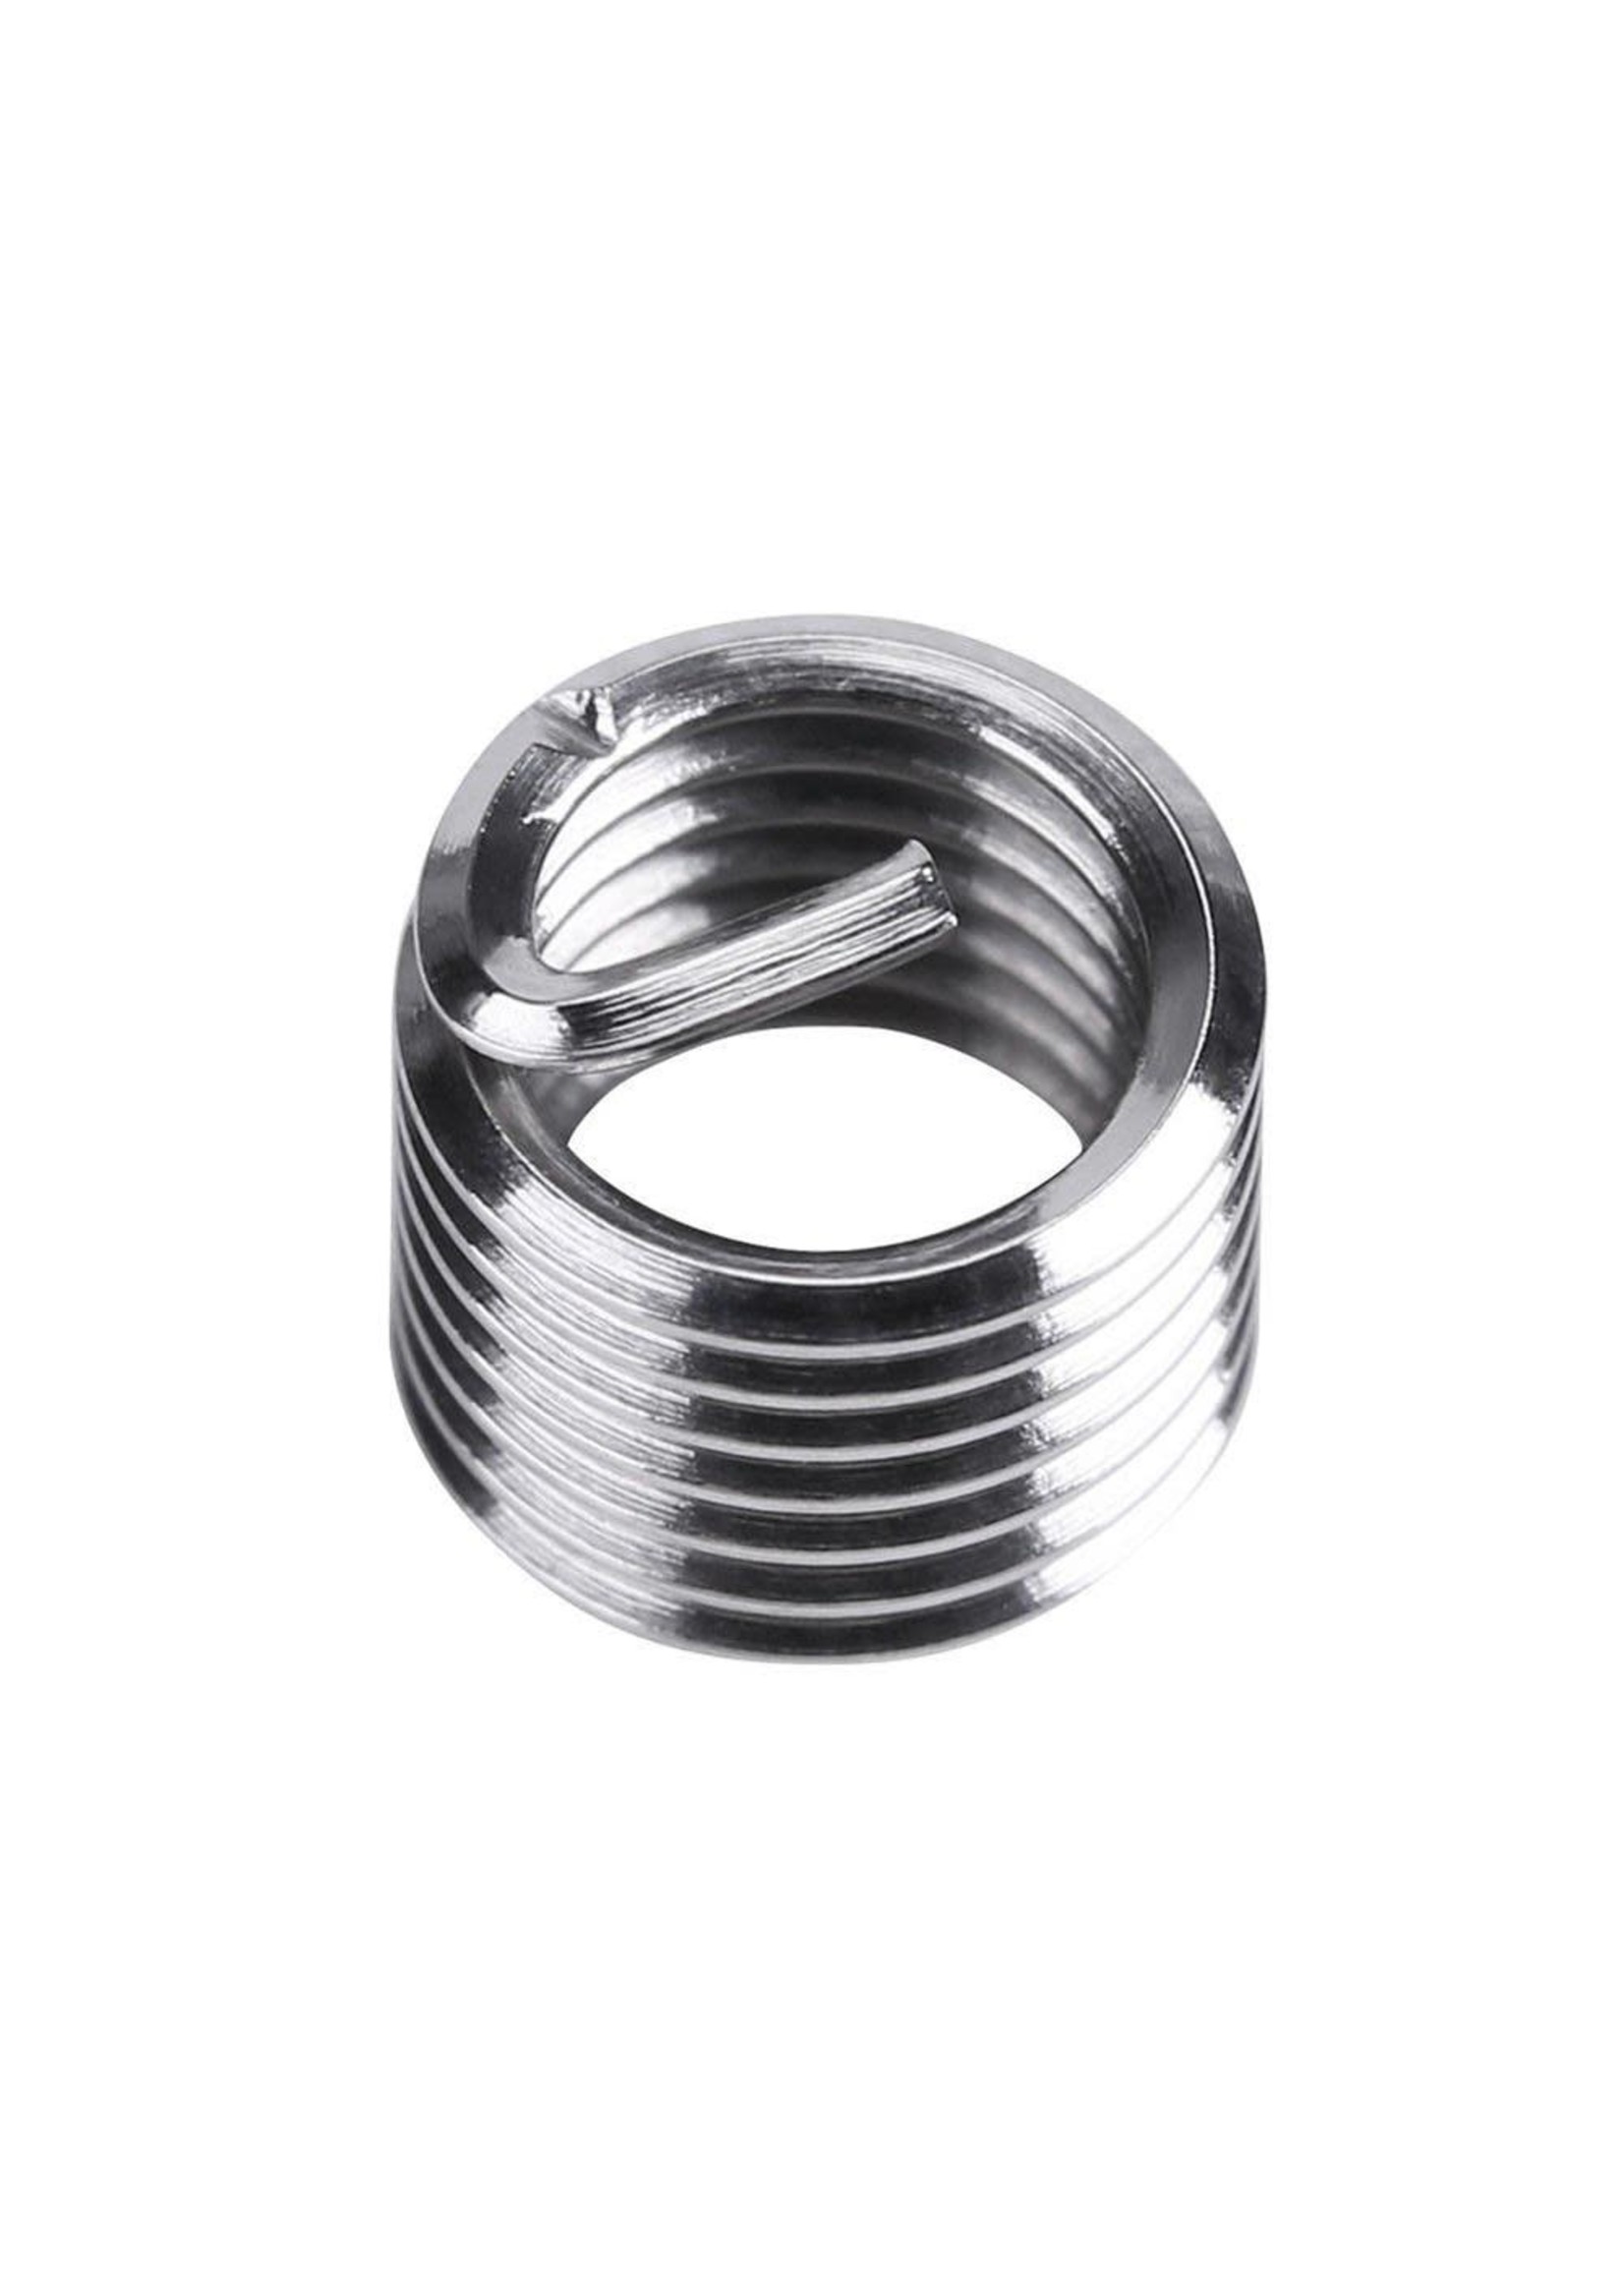 Helicoil 10 x 1mm Helicoil Thread Insert